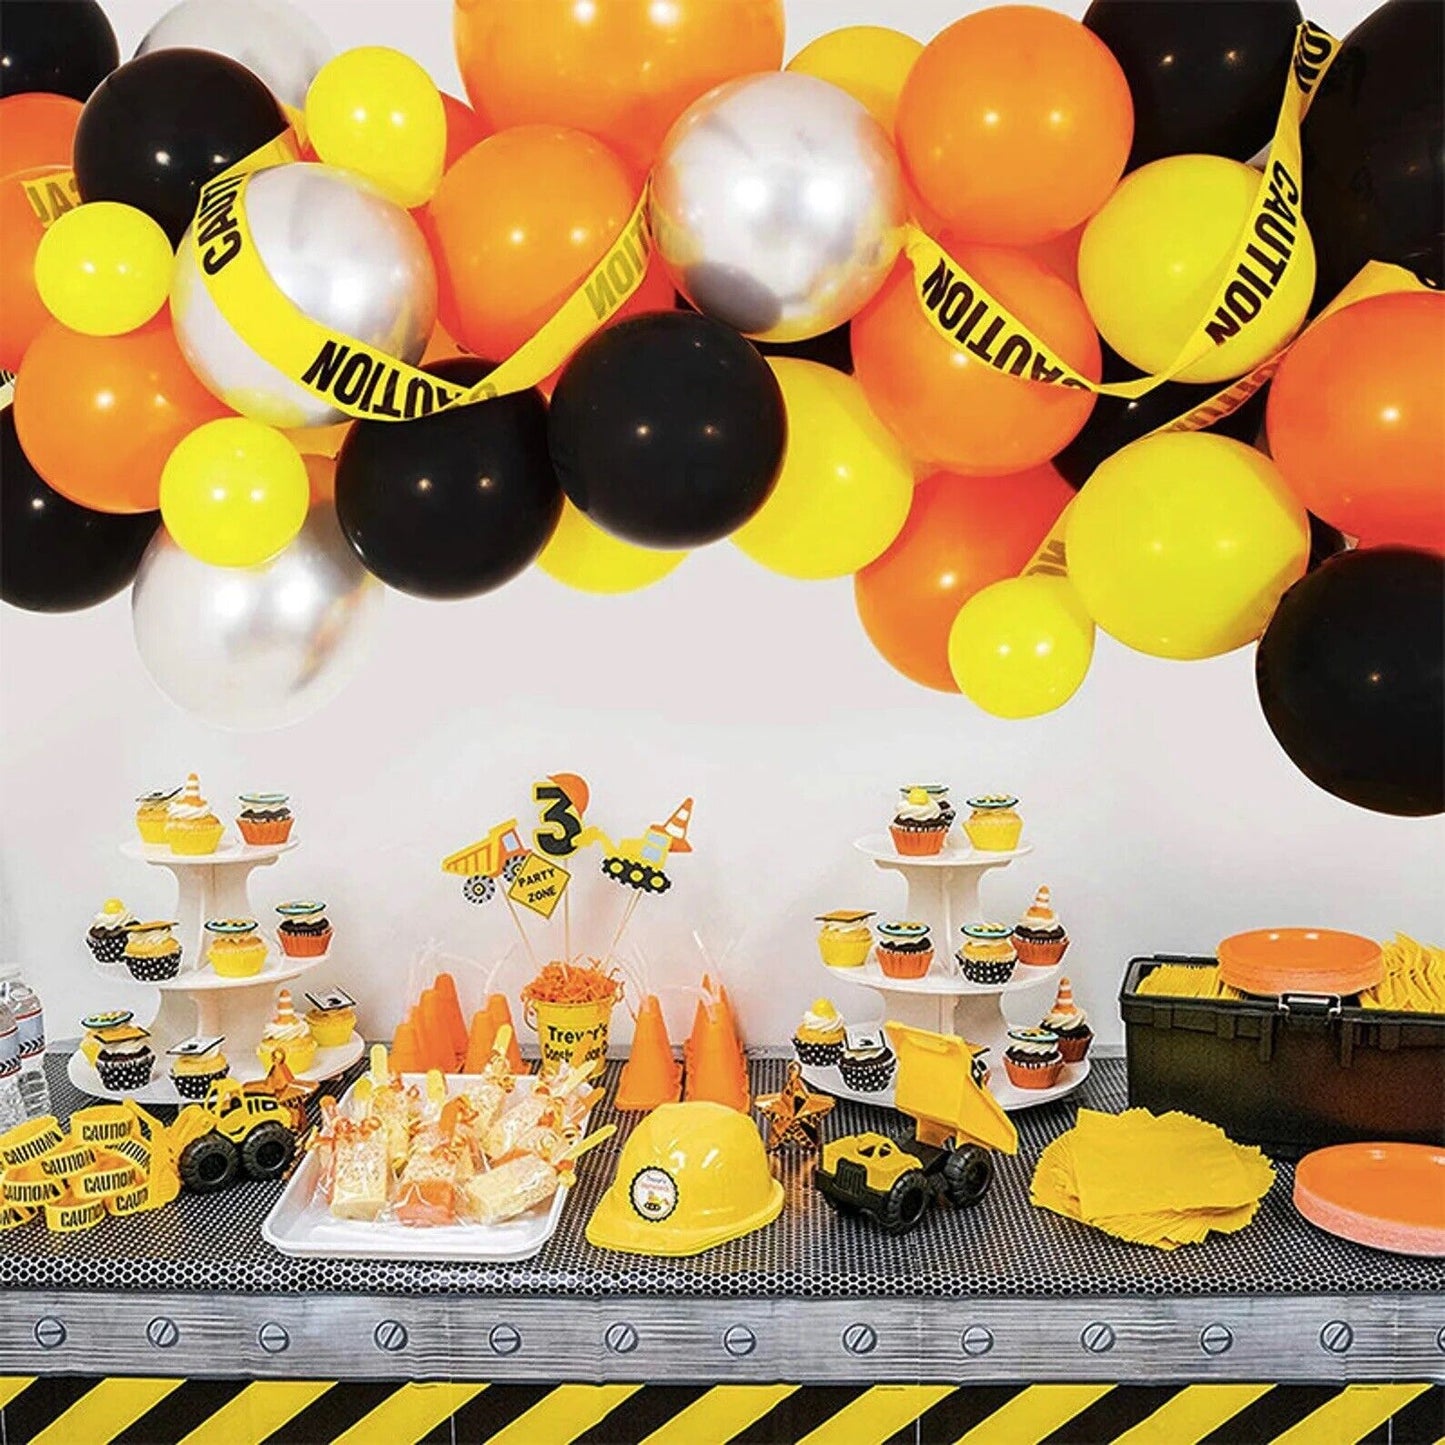 Construction Theme Balloon Arch Kit with Caution Tapes